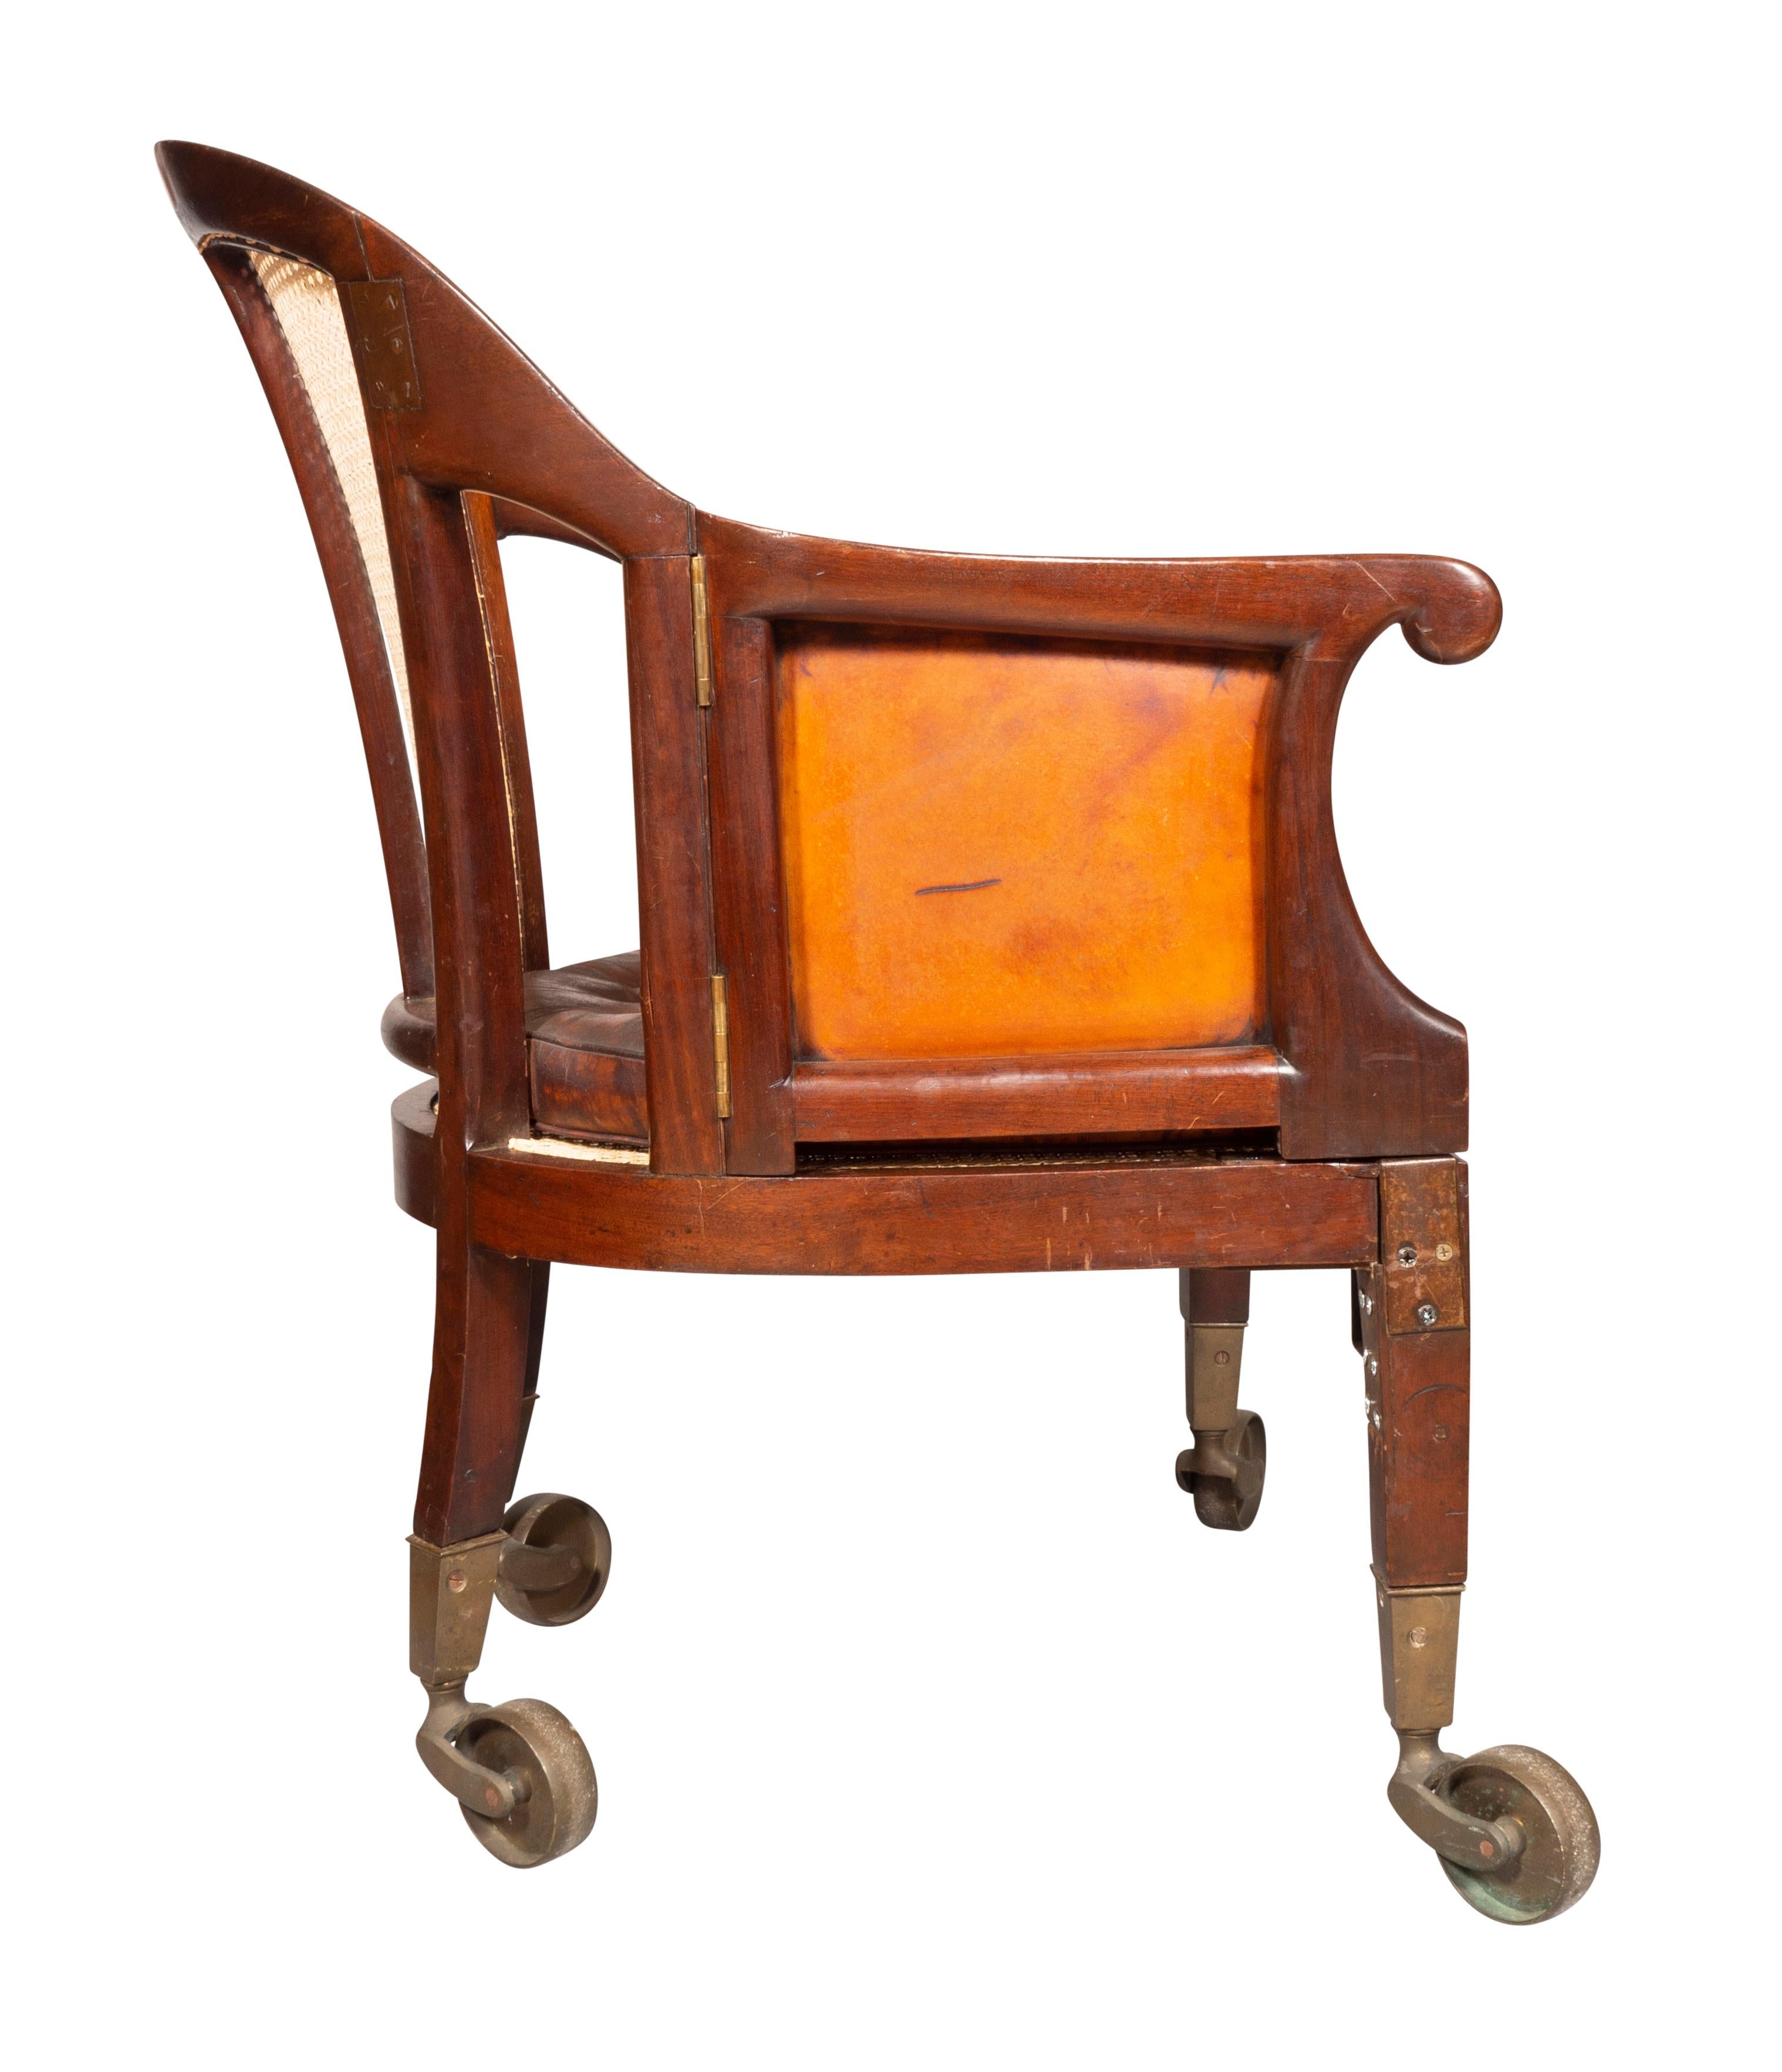 Unusual Regency Mahogany and Brass Campaign Chair In Good Condition For Sale In Essex, MA